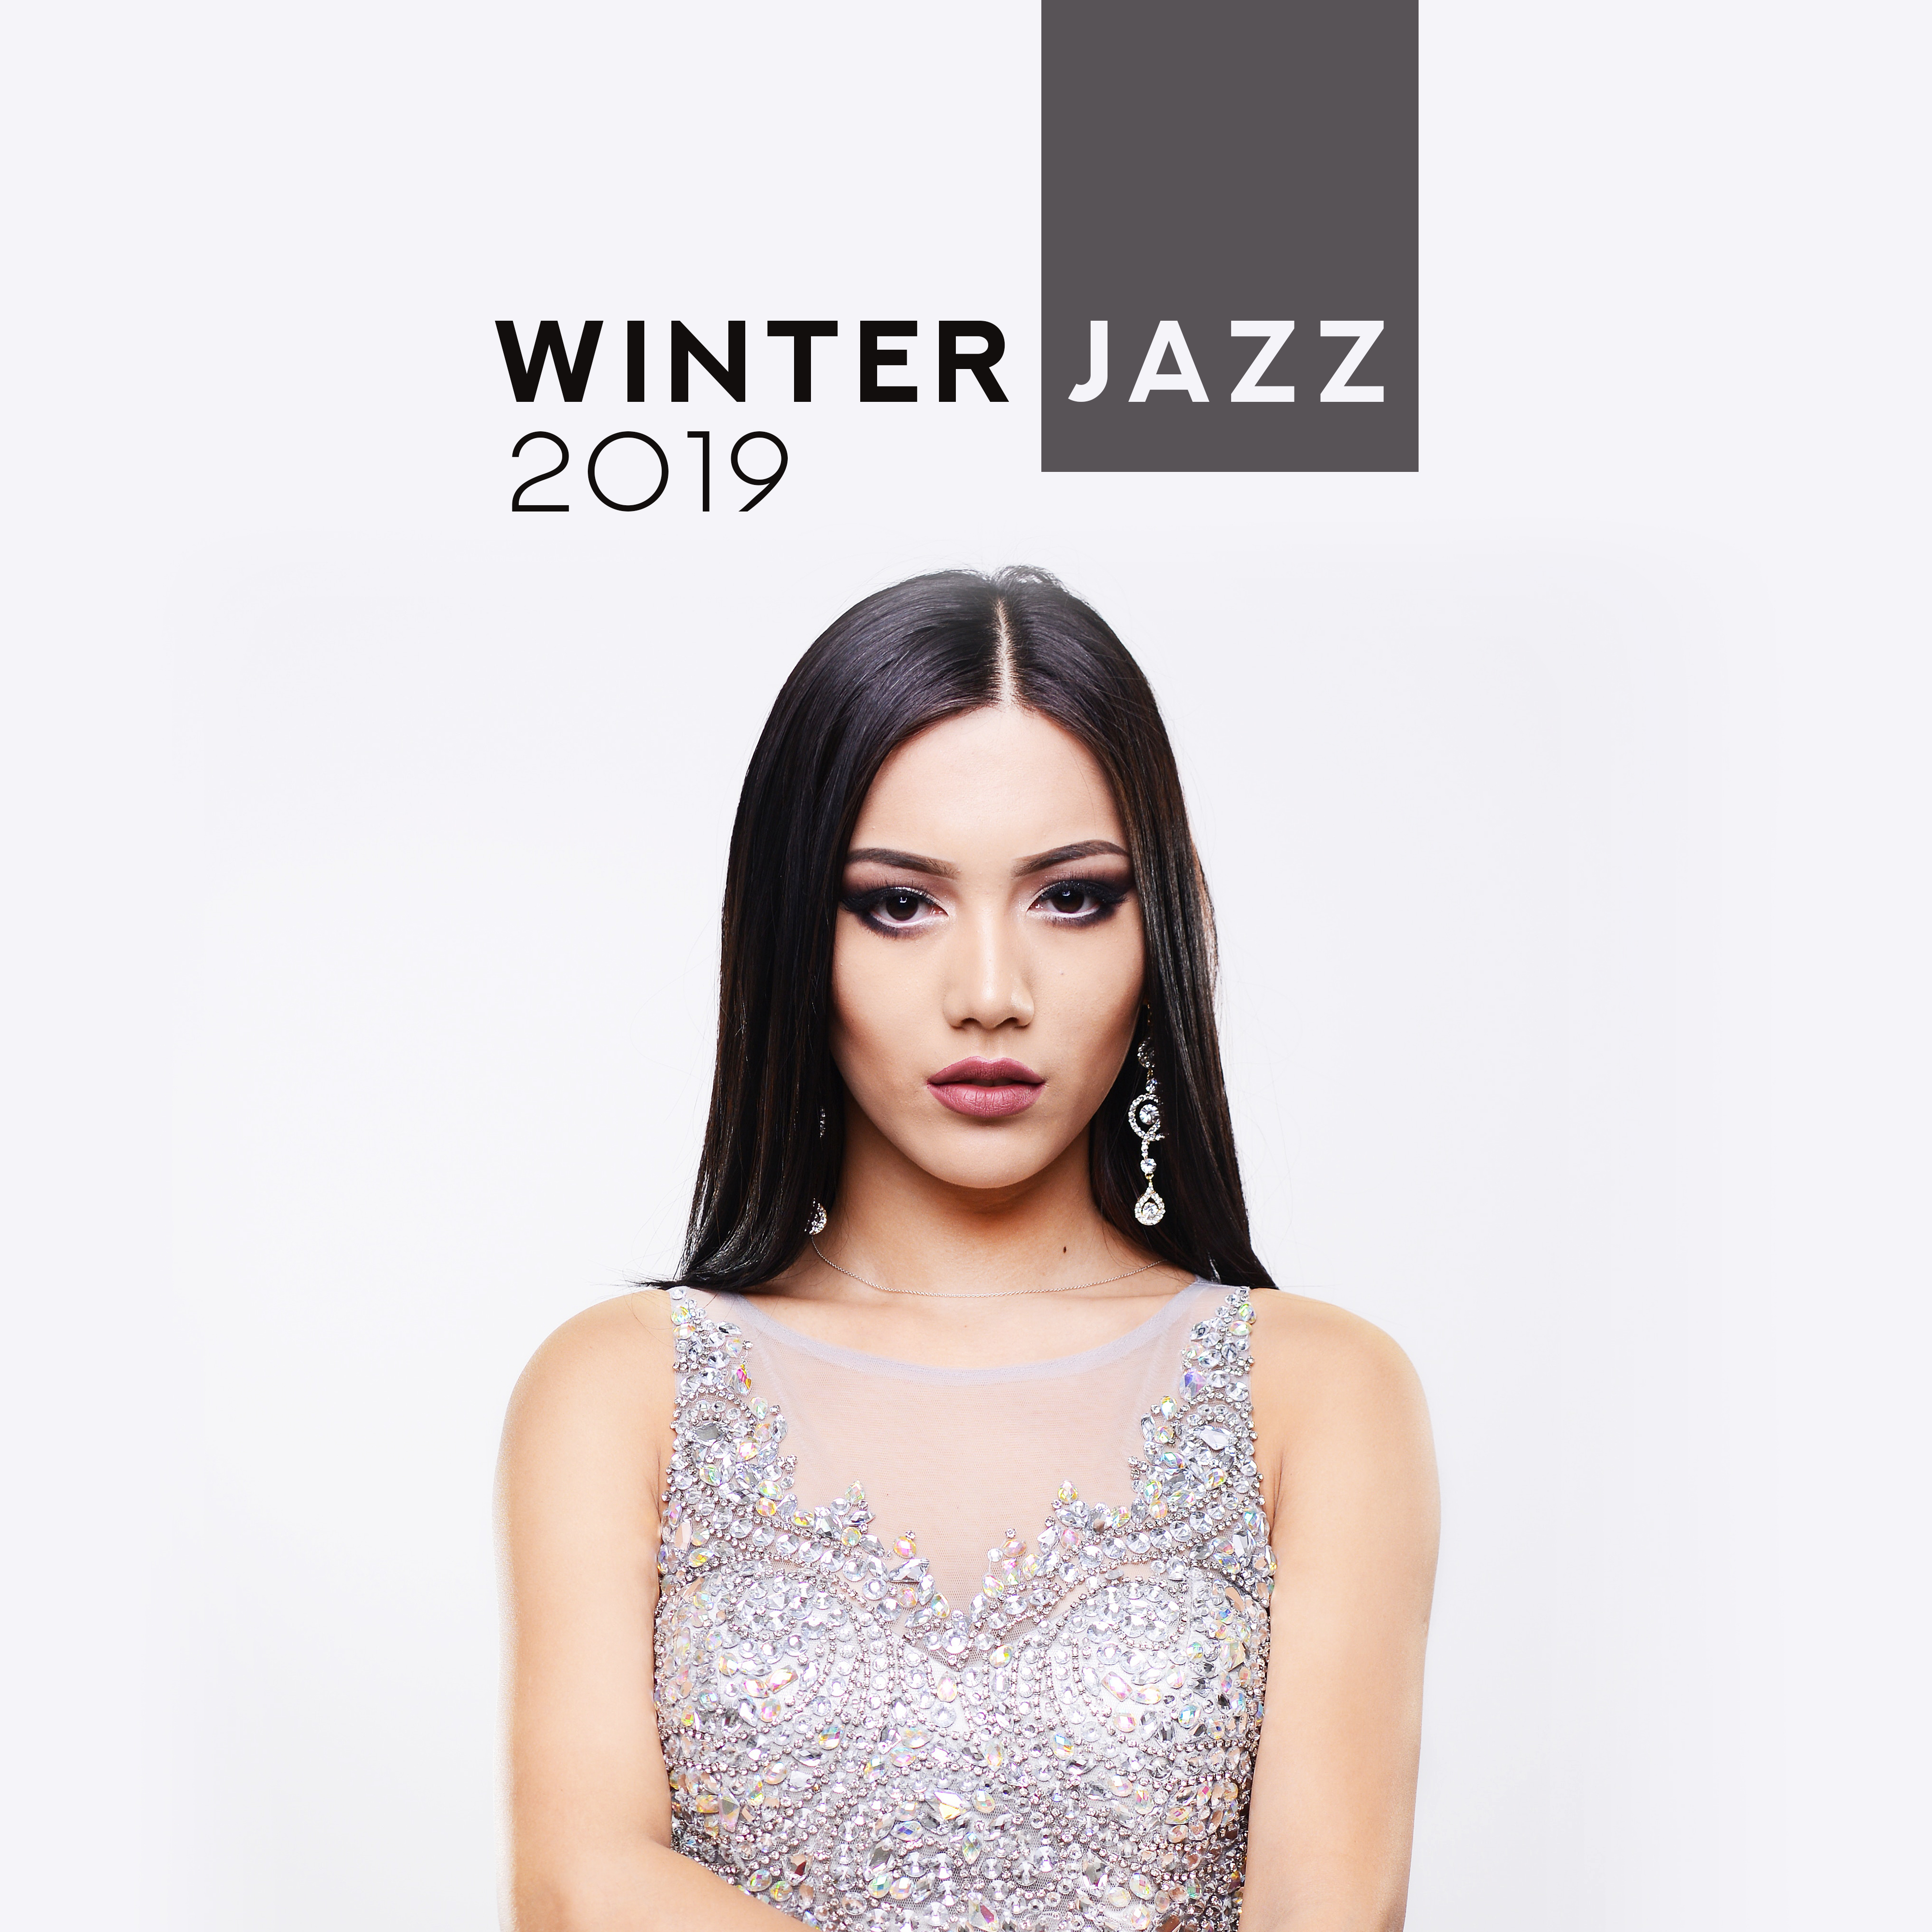 Winter Jazz 2019 – Smooth Music, Lounge Jazz Coffee, Classical Jazz for Relaxation, Rest, Calm, Relaxing Jazz Songs 2019